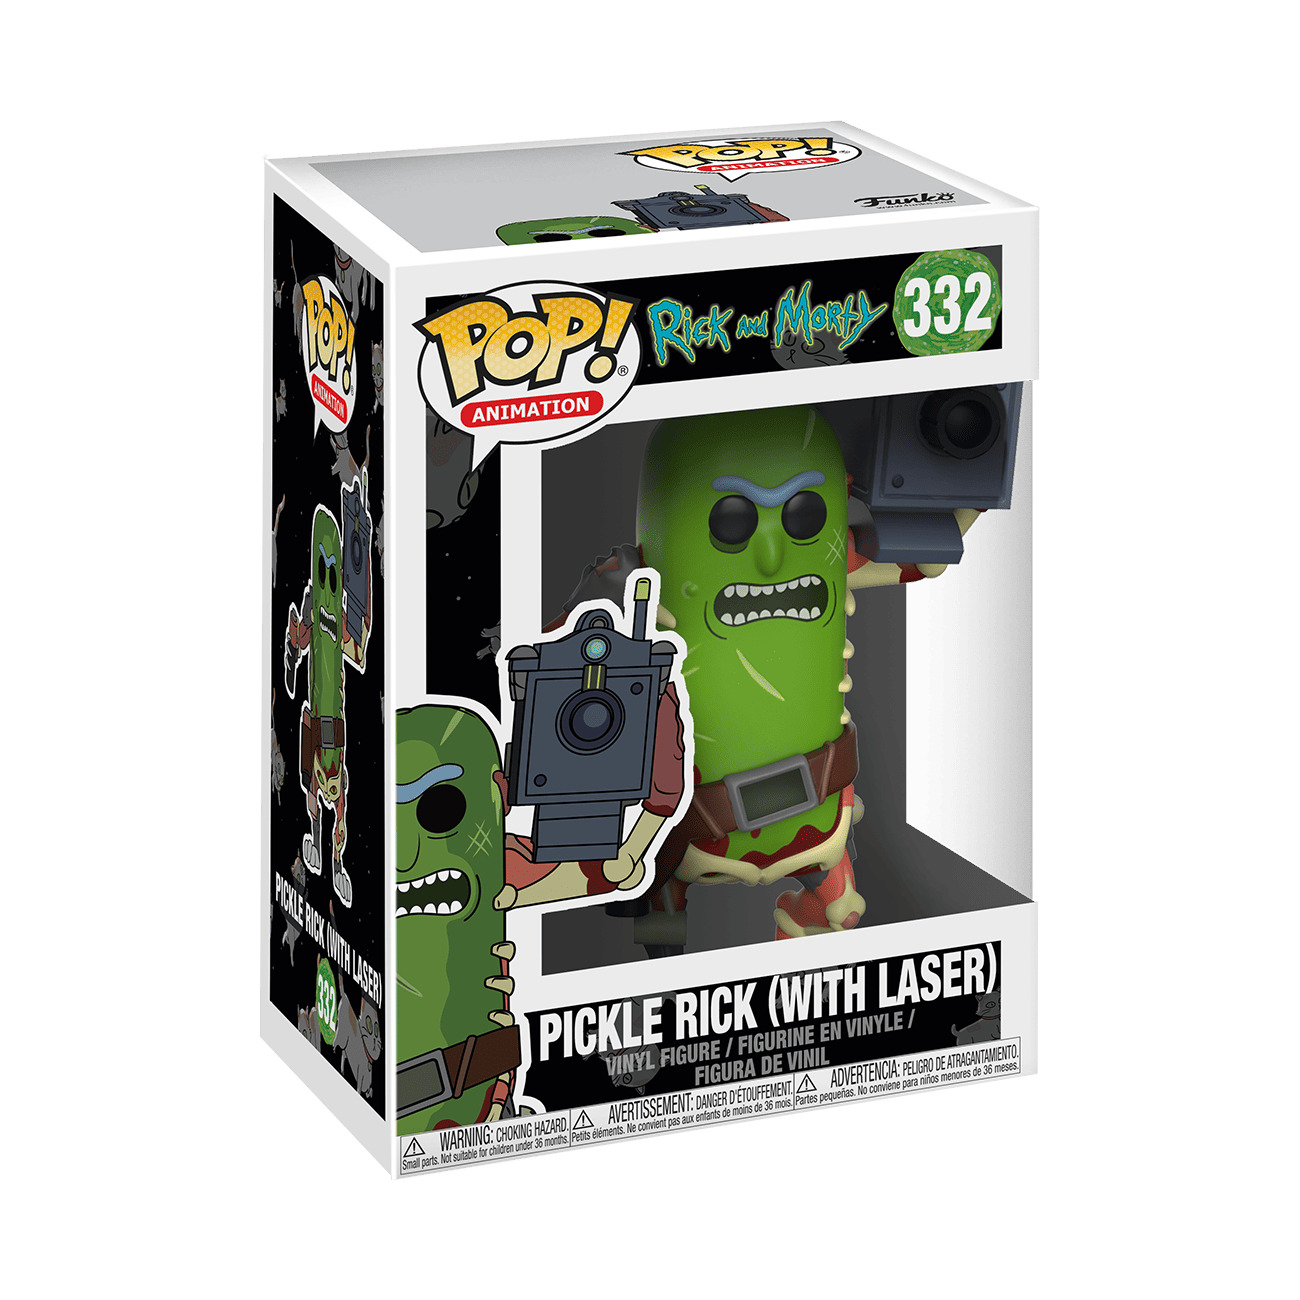 Pickle Rick (Wounded) #332 Funko Pop Vinyl: Rick and Morty